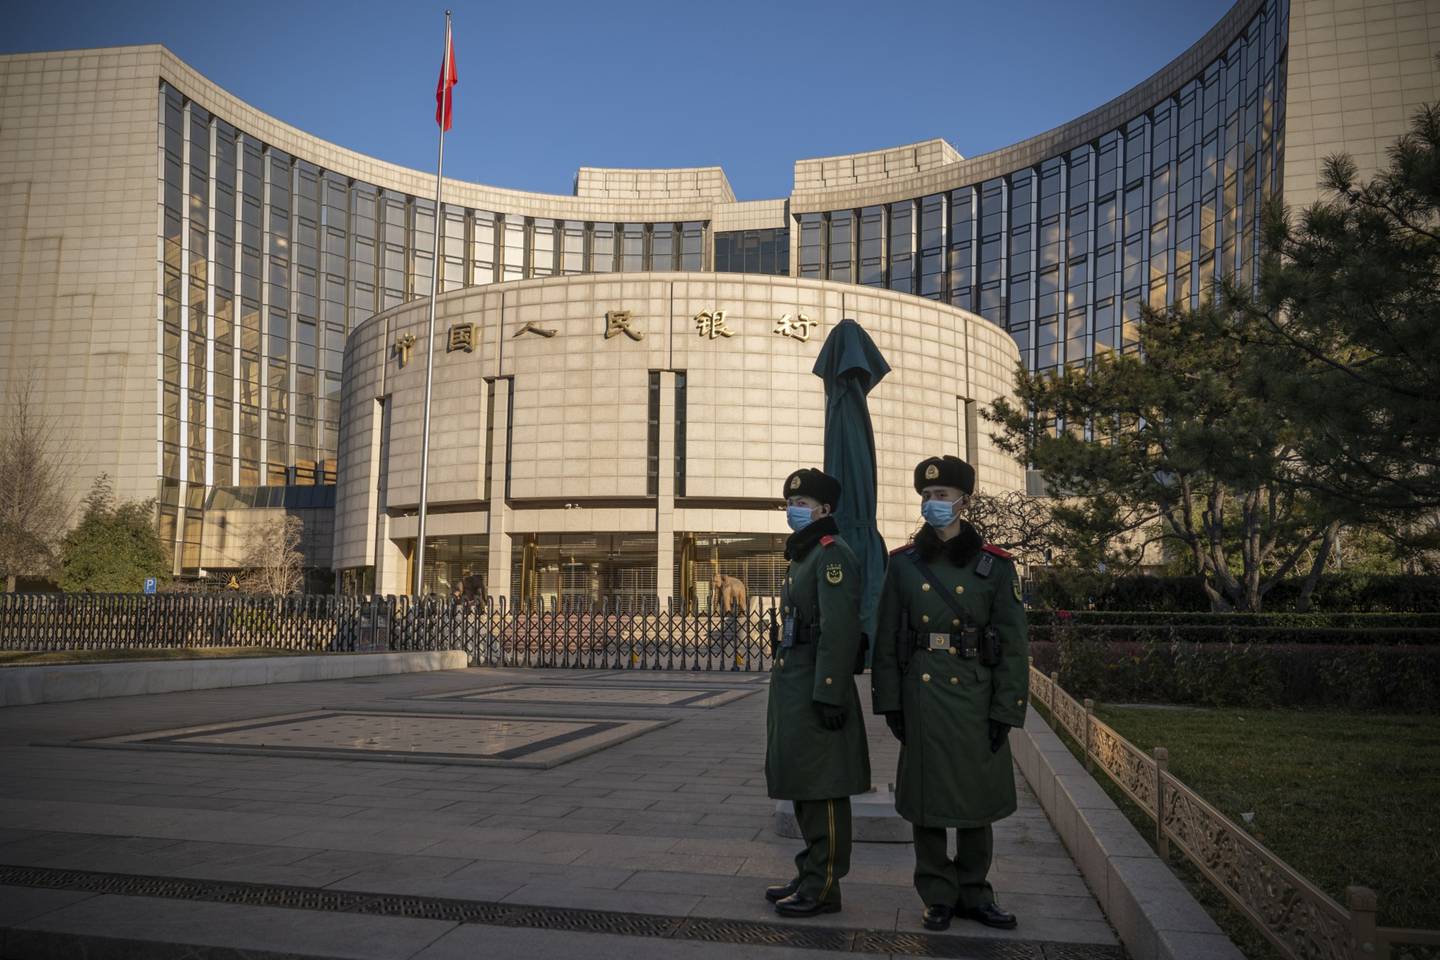 People's Liberation Army soldiers stand in front of the People's Bank of China (PBOC) in Beijing, China, on Monday, Dec. 13, 2021.